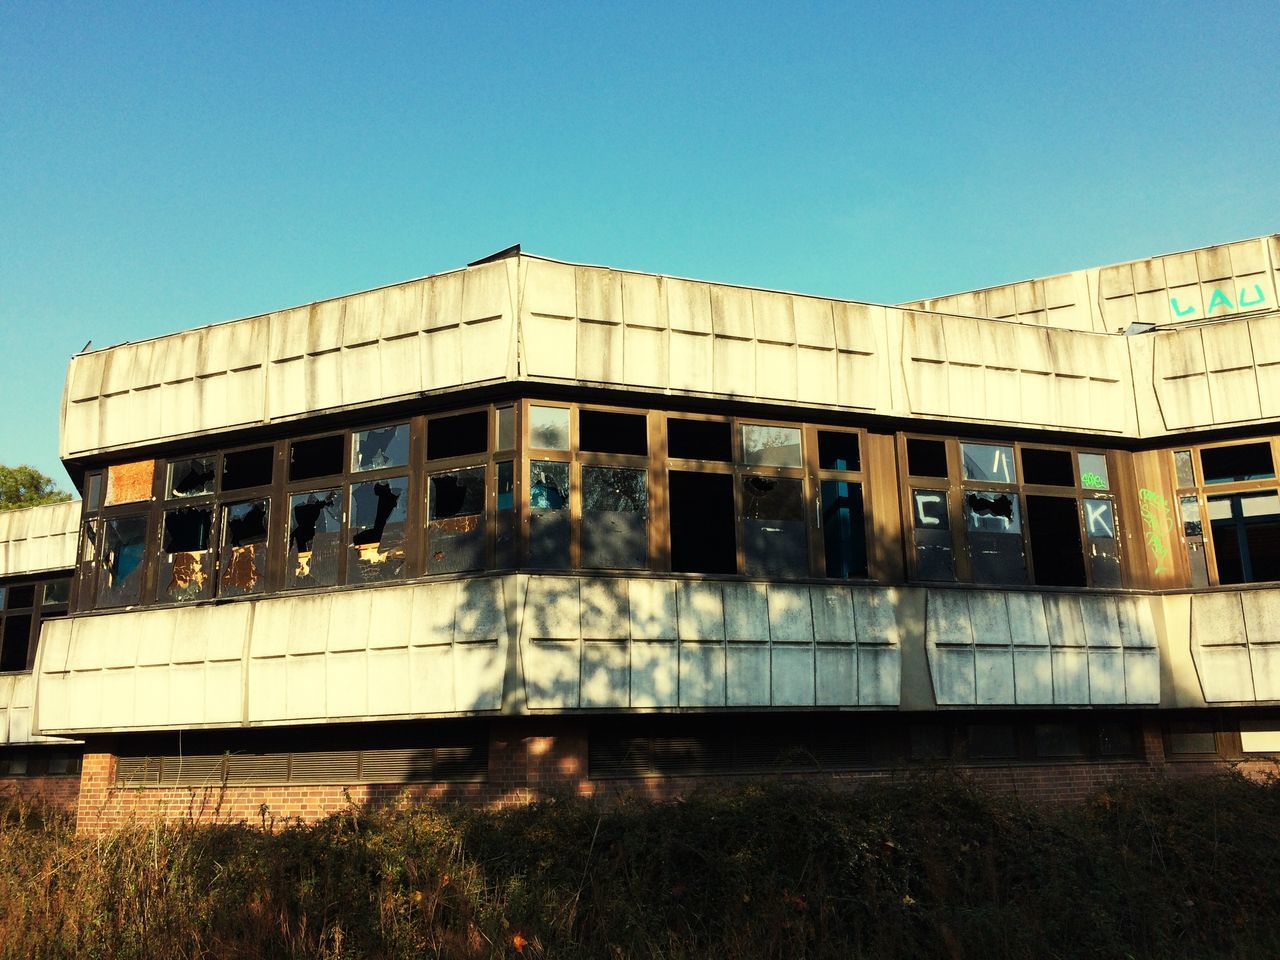 architecture, built structure, building exterior, clear sky, copy space, building, exterior, abandoned, window, sunlight, old, day, outdoors, transportation, blue, facade, house, sky, obsolete, no people